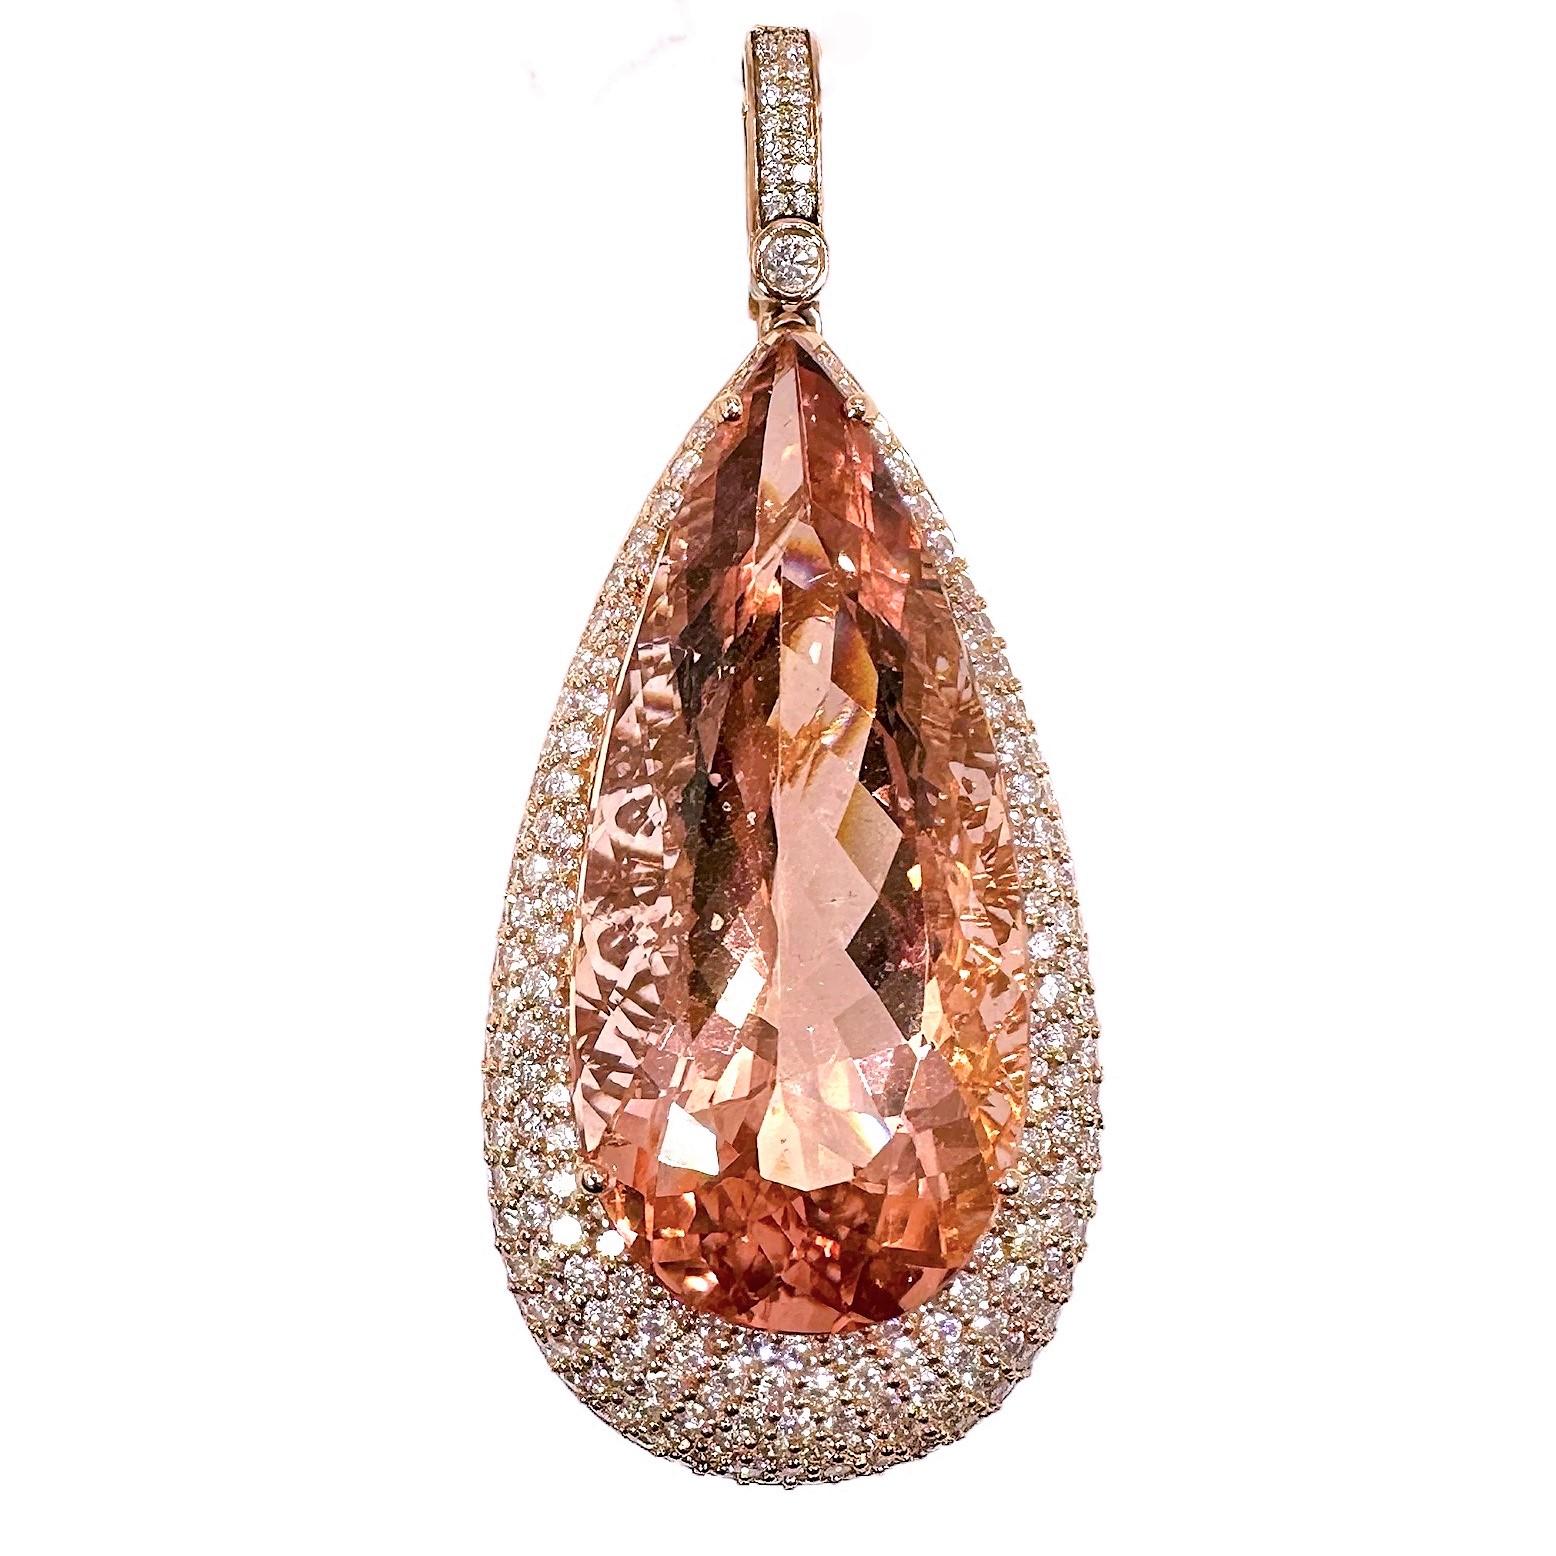 This beautifully designed and crafted 18K rose gold pendant is set with one center opulently sherry colored, pear shaped, faceted, Morganite weighing approximately 40.00ct.  Surrounding the center Morganite are hundreds of precision set round